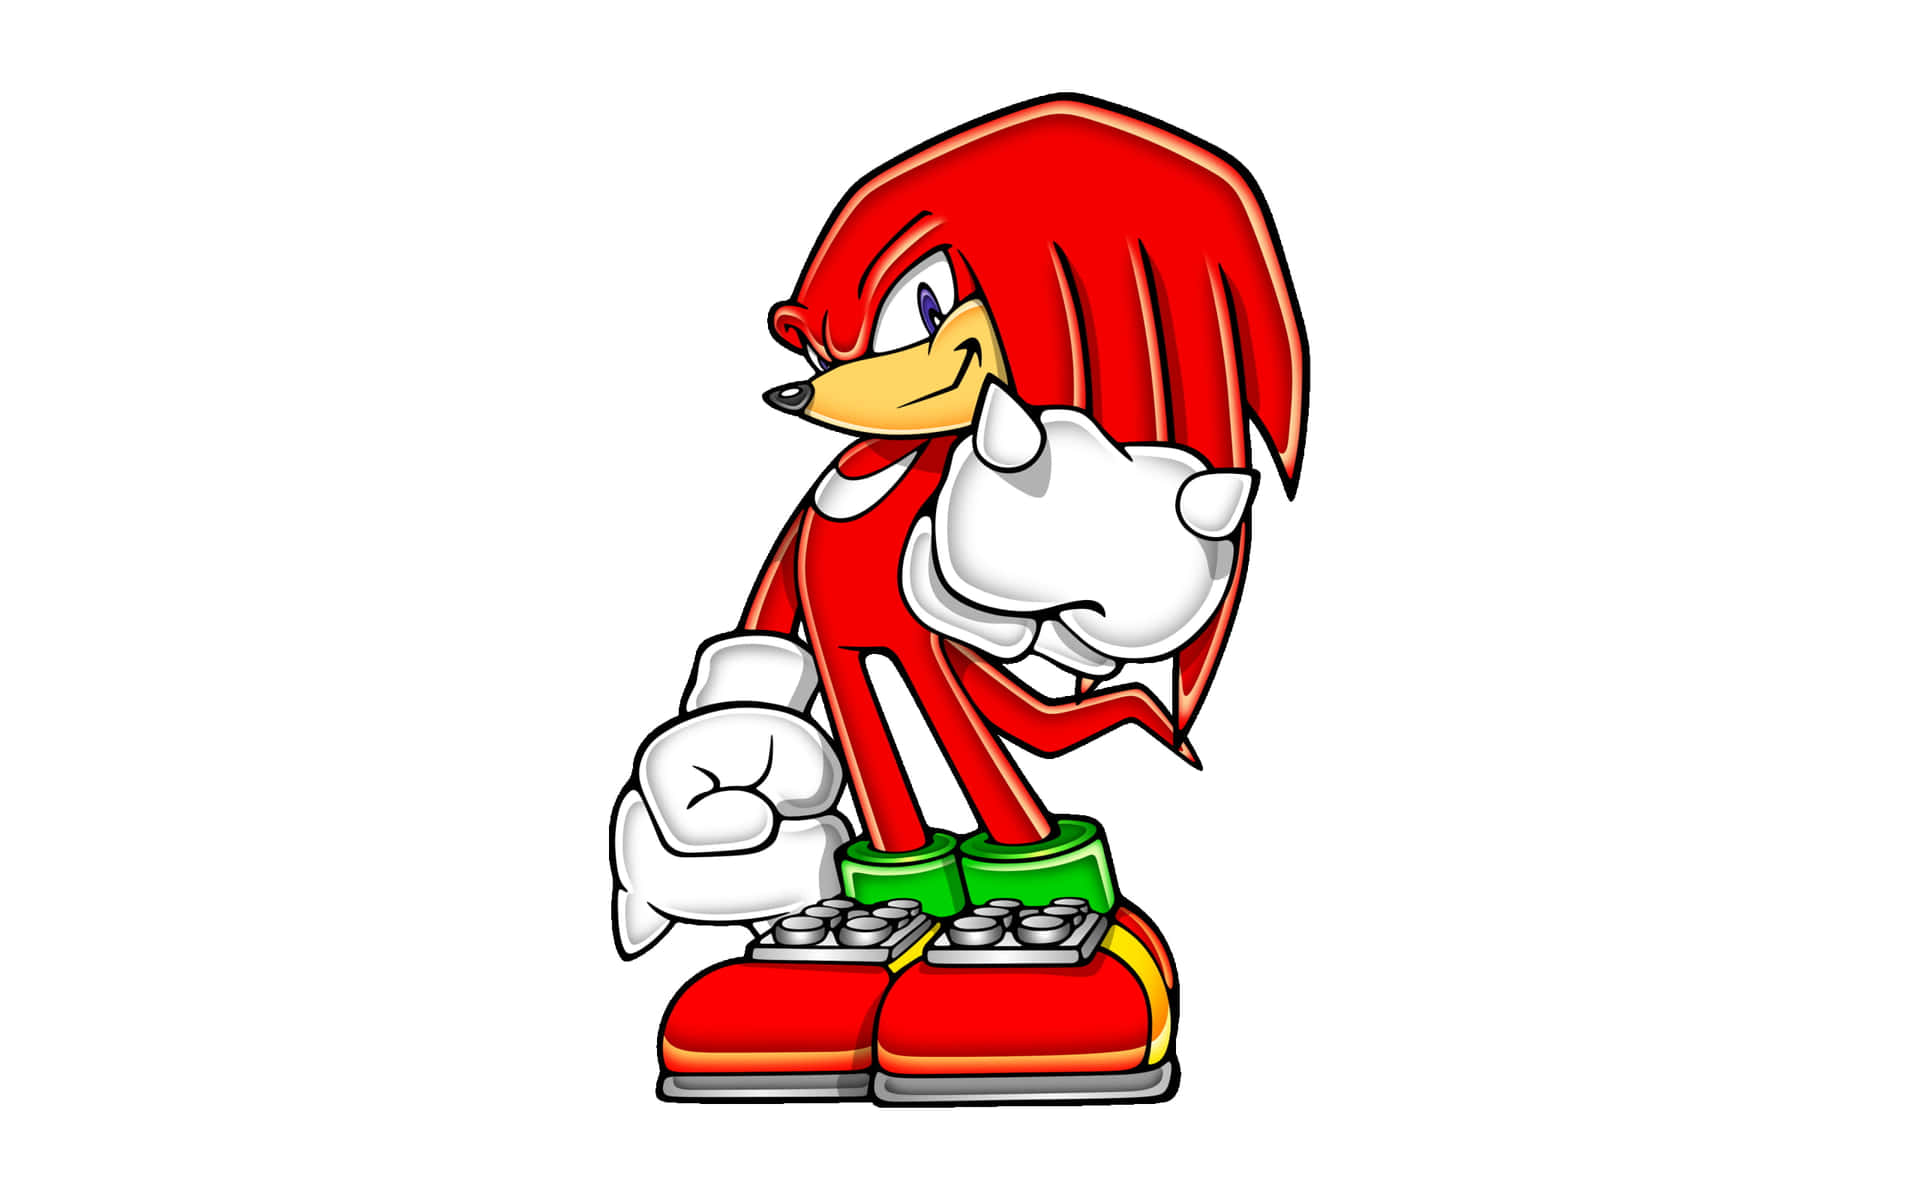 Check Out Knuckles, The Cheeky Echidna With Attitude!